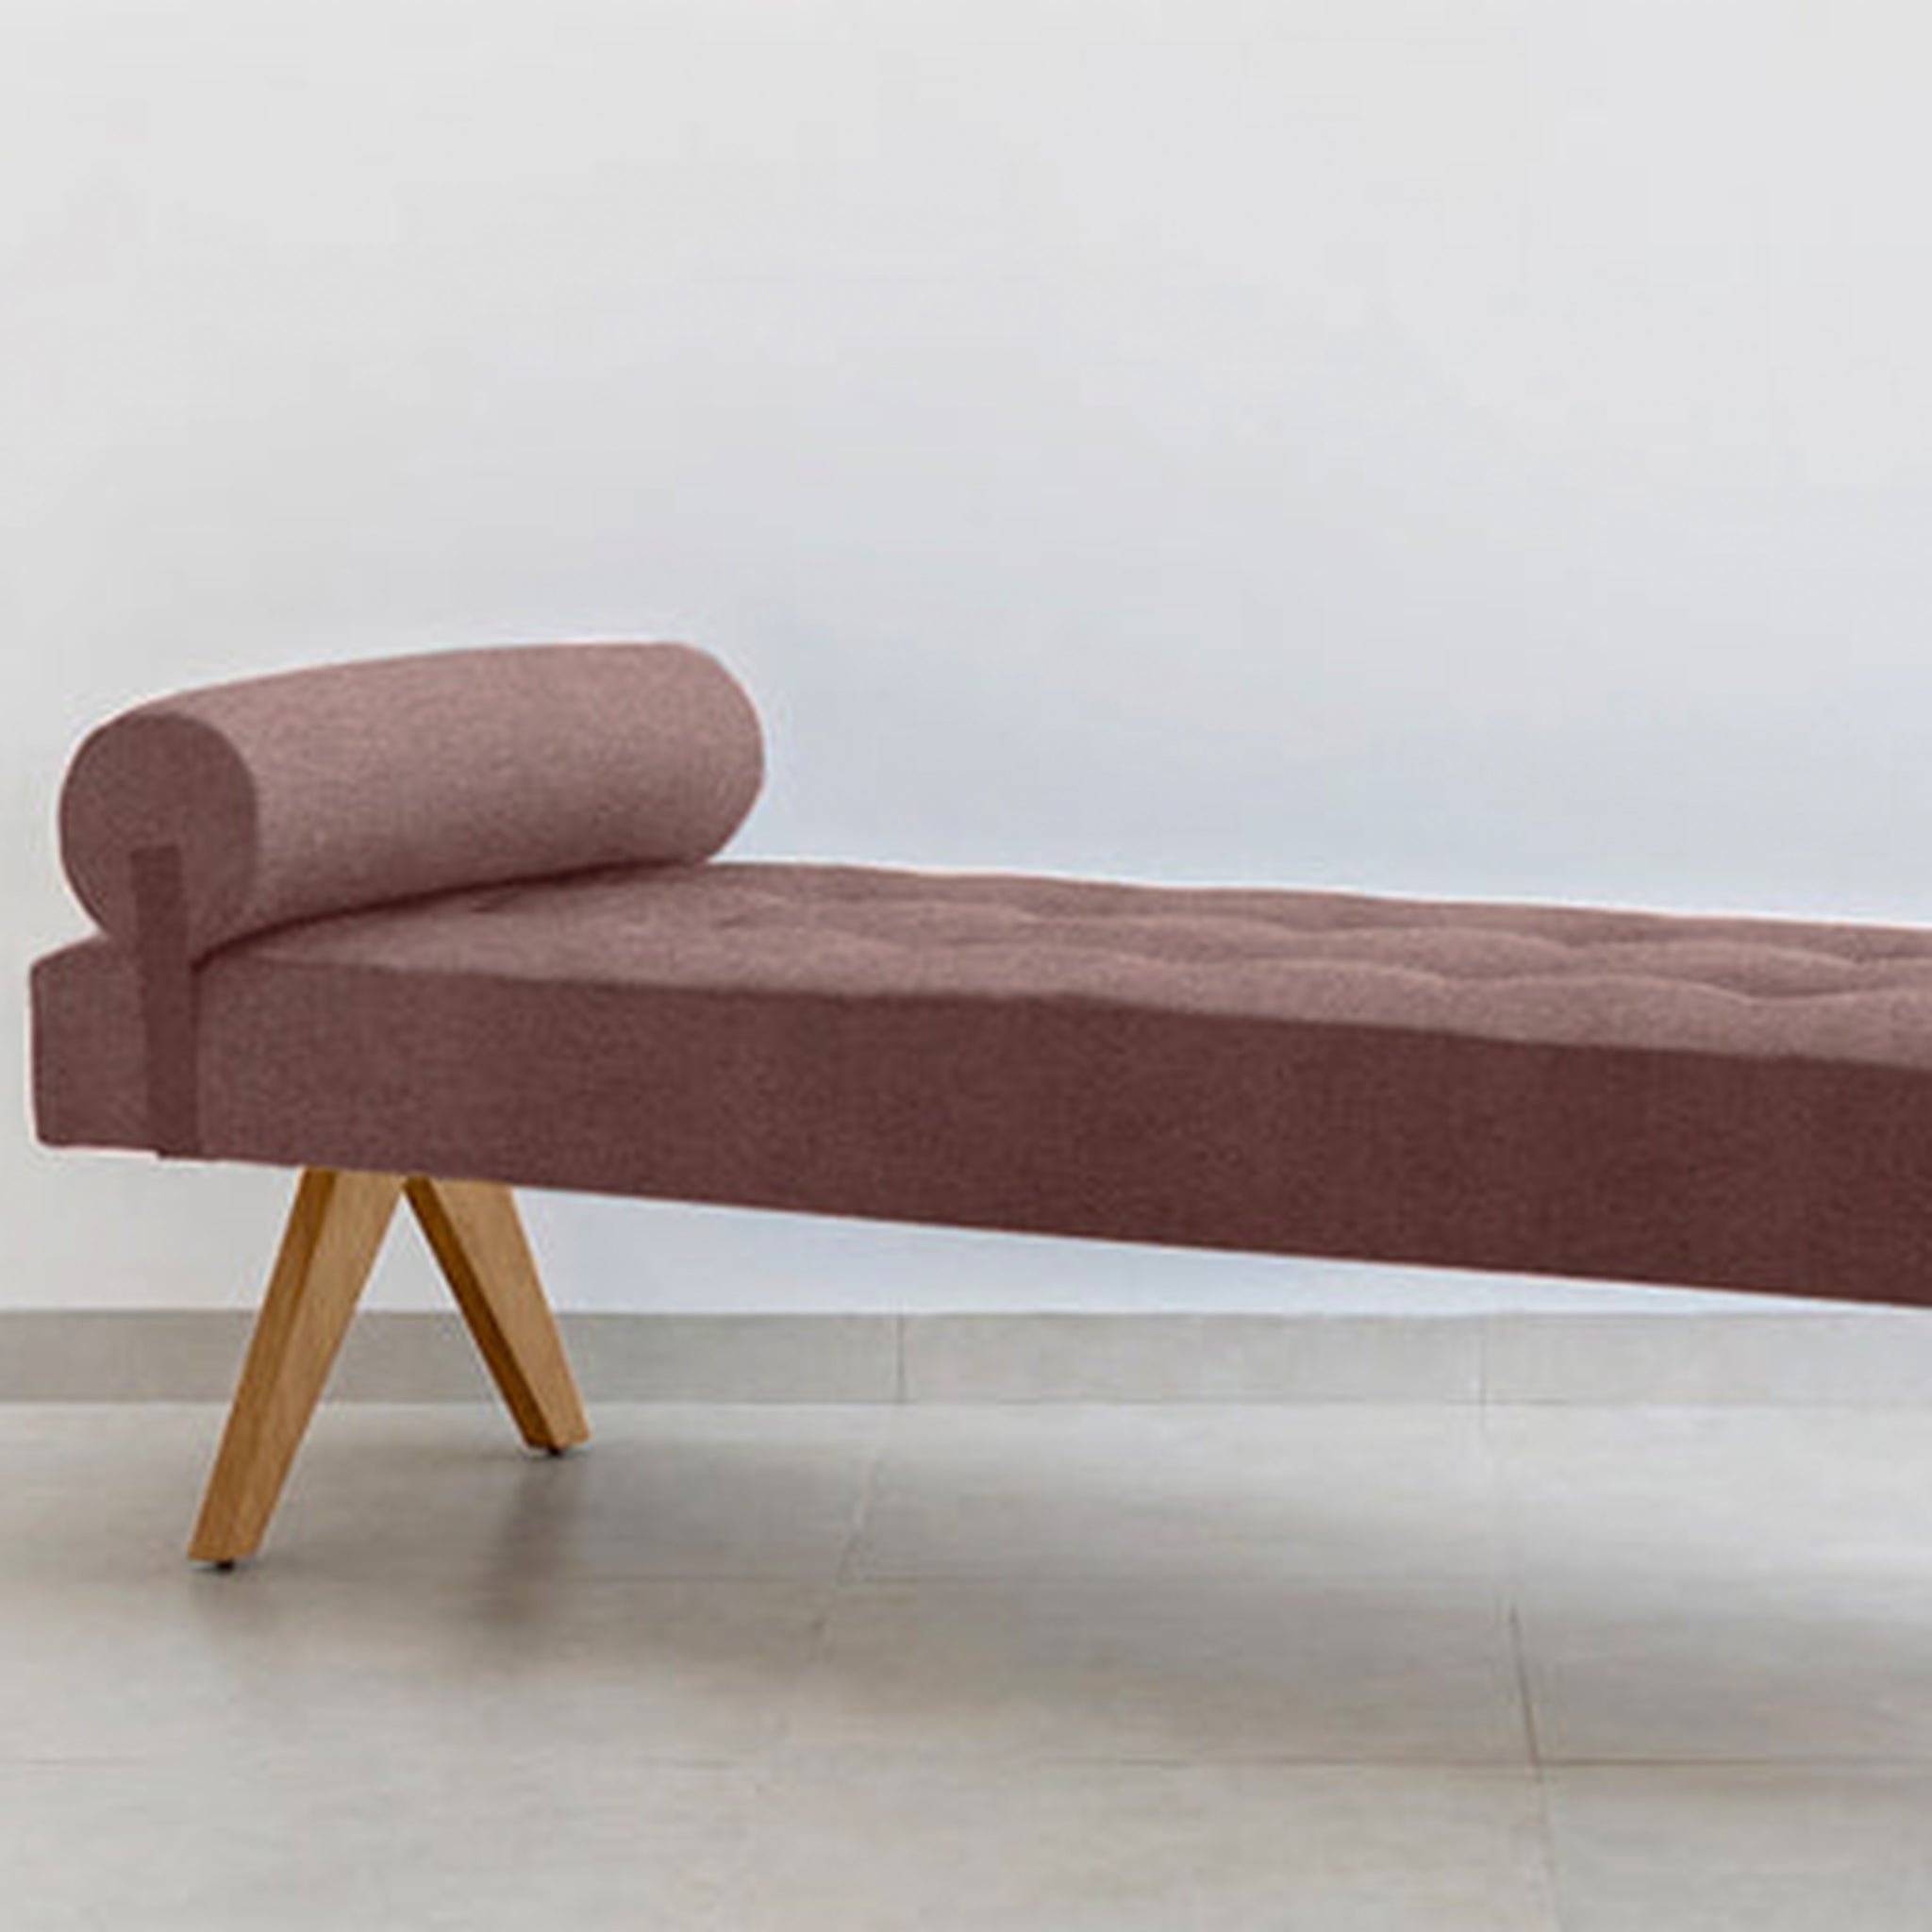 The Jack Daybed perfect for contemporary decor